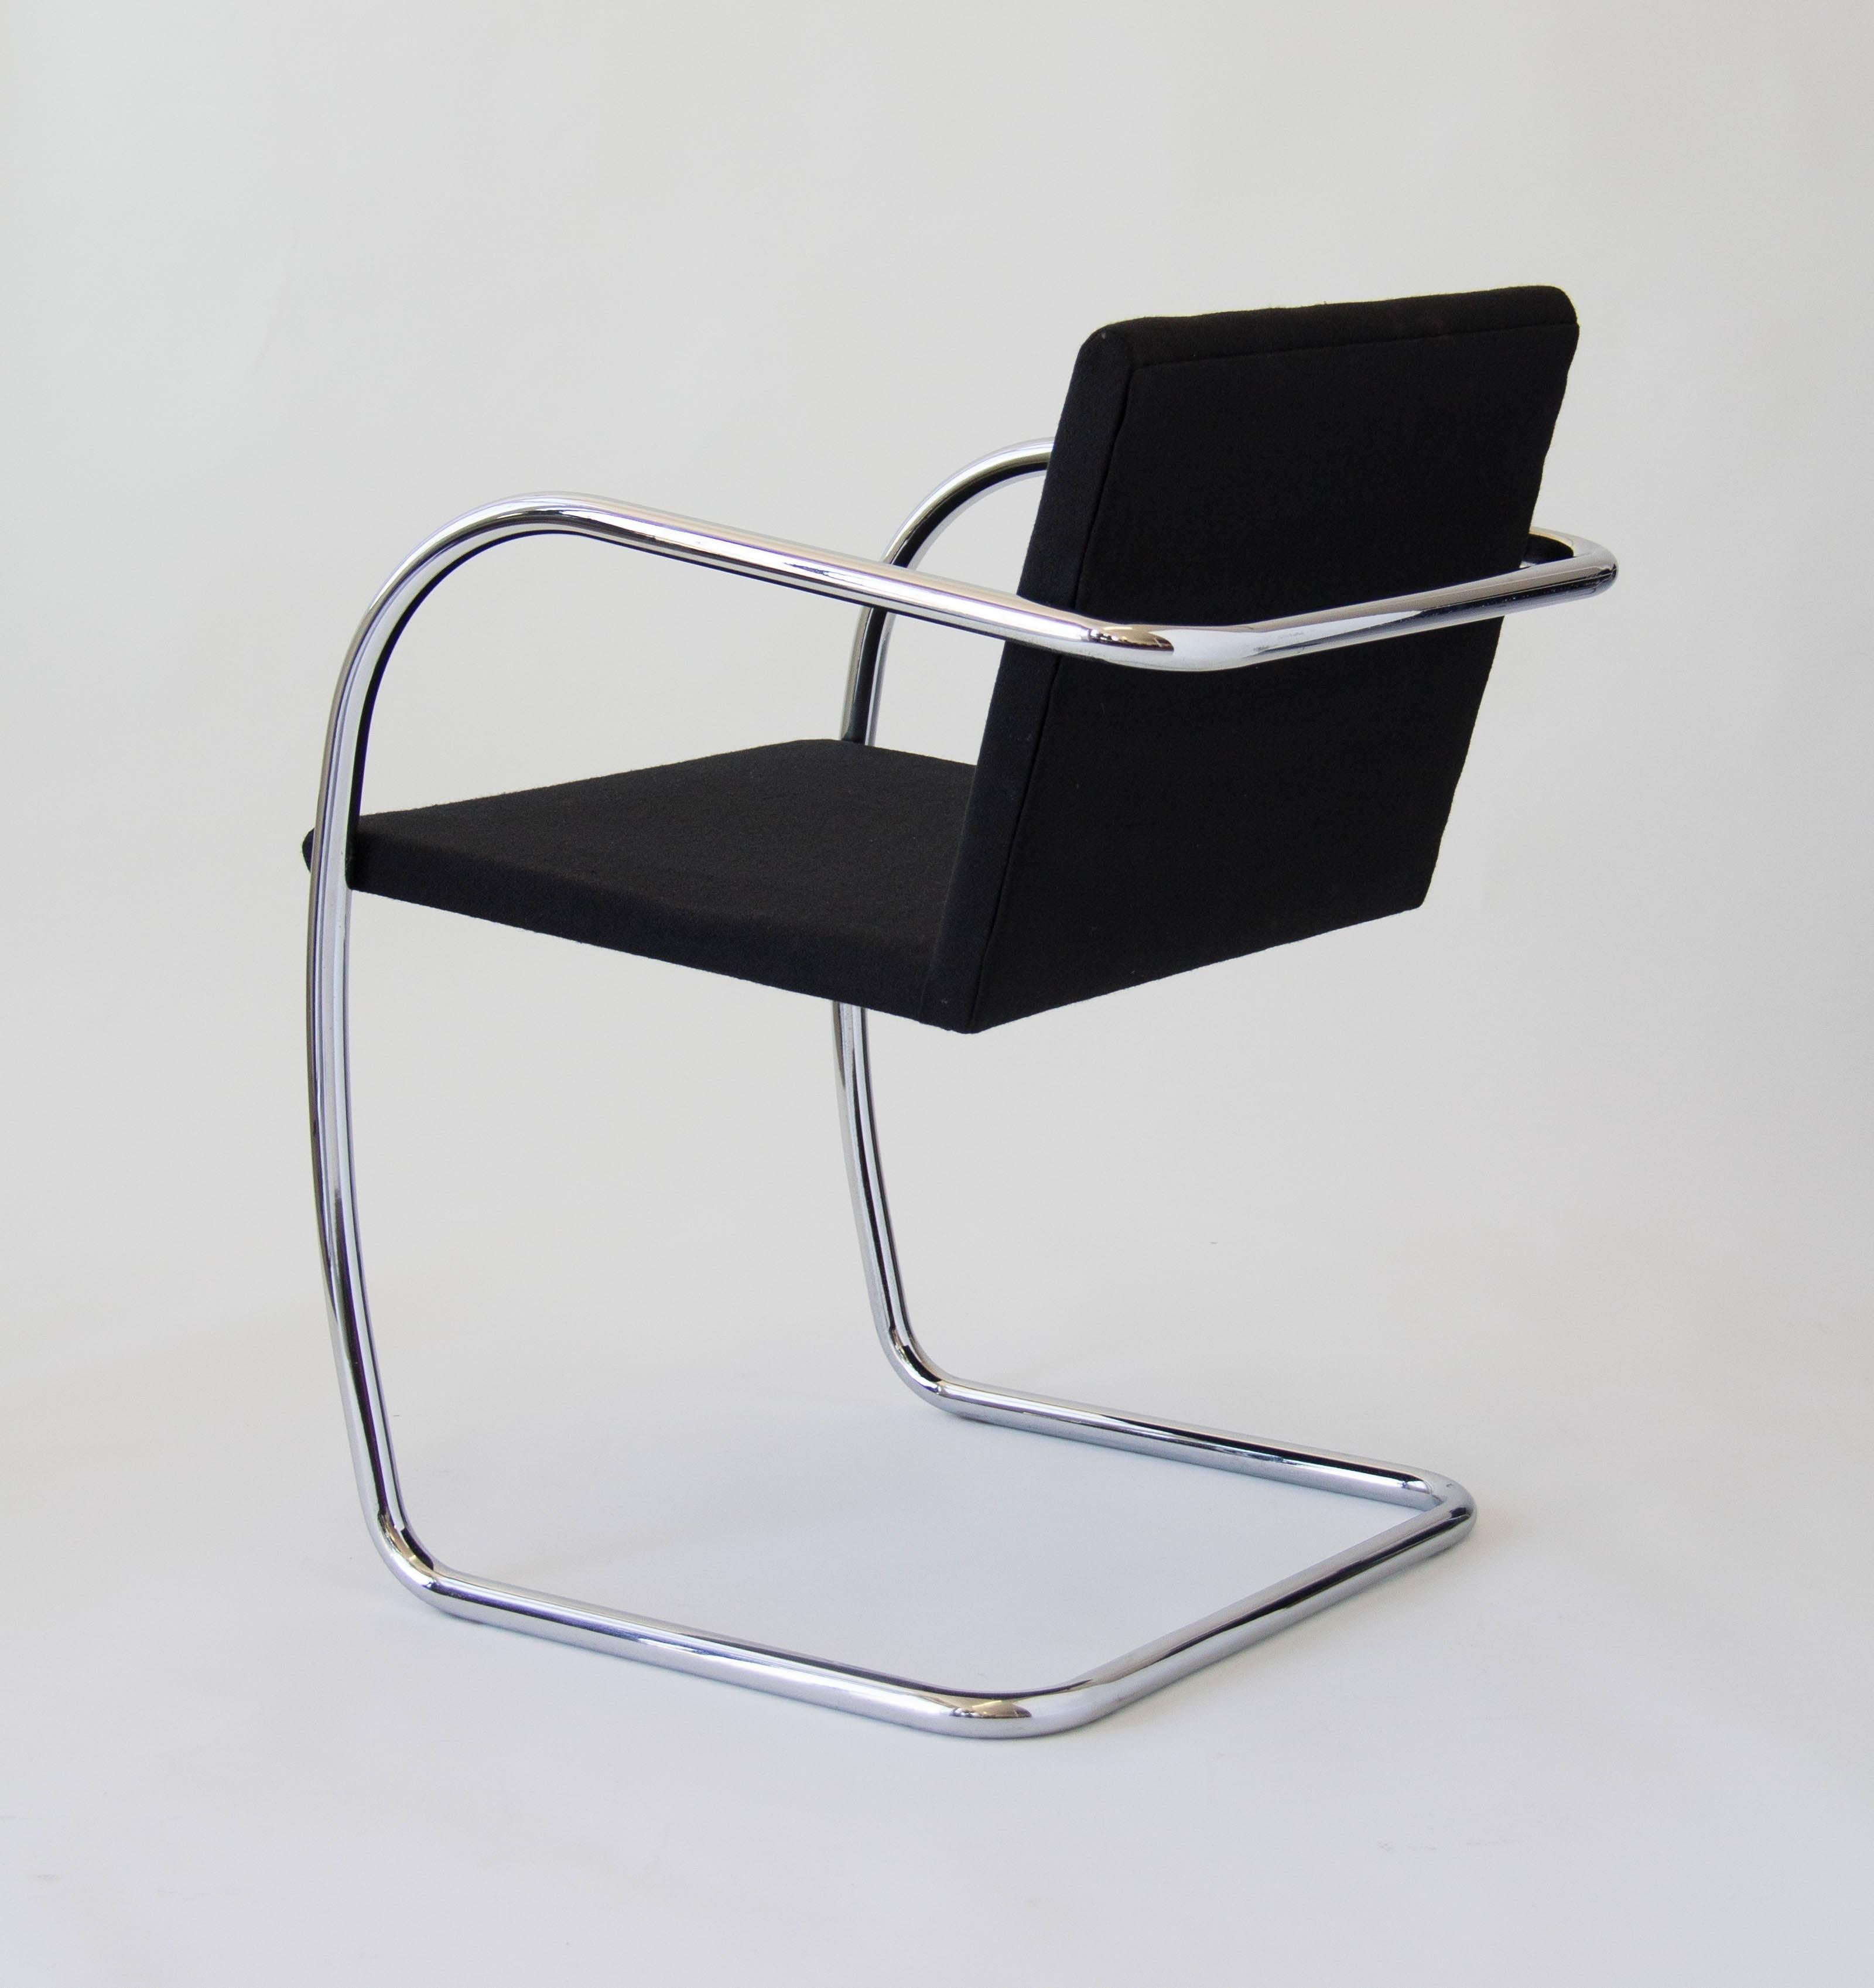 20th Century Tubular Brno Chairs by Mies van der Rohe for Knoll International